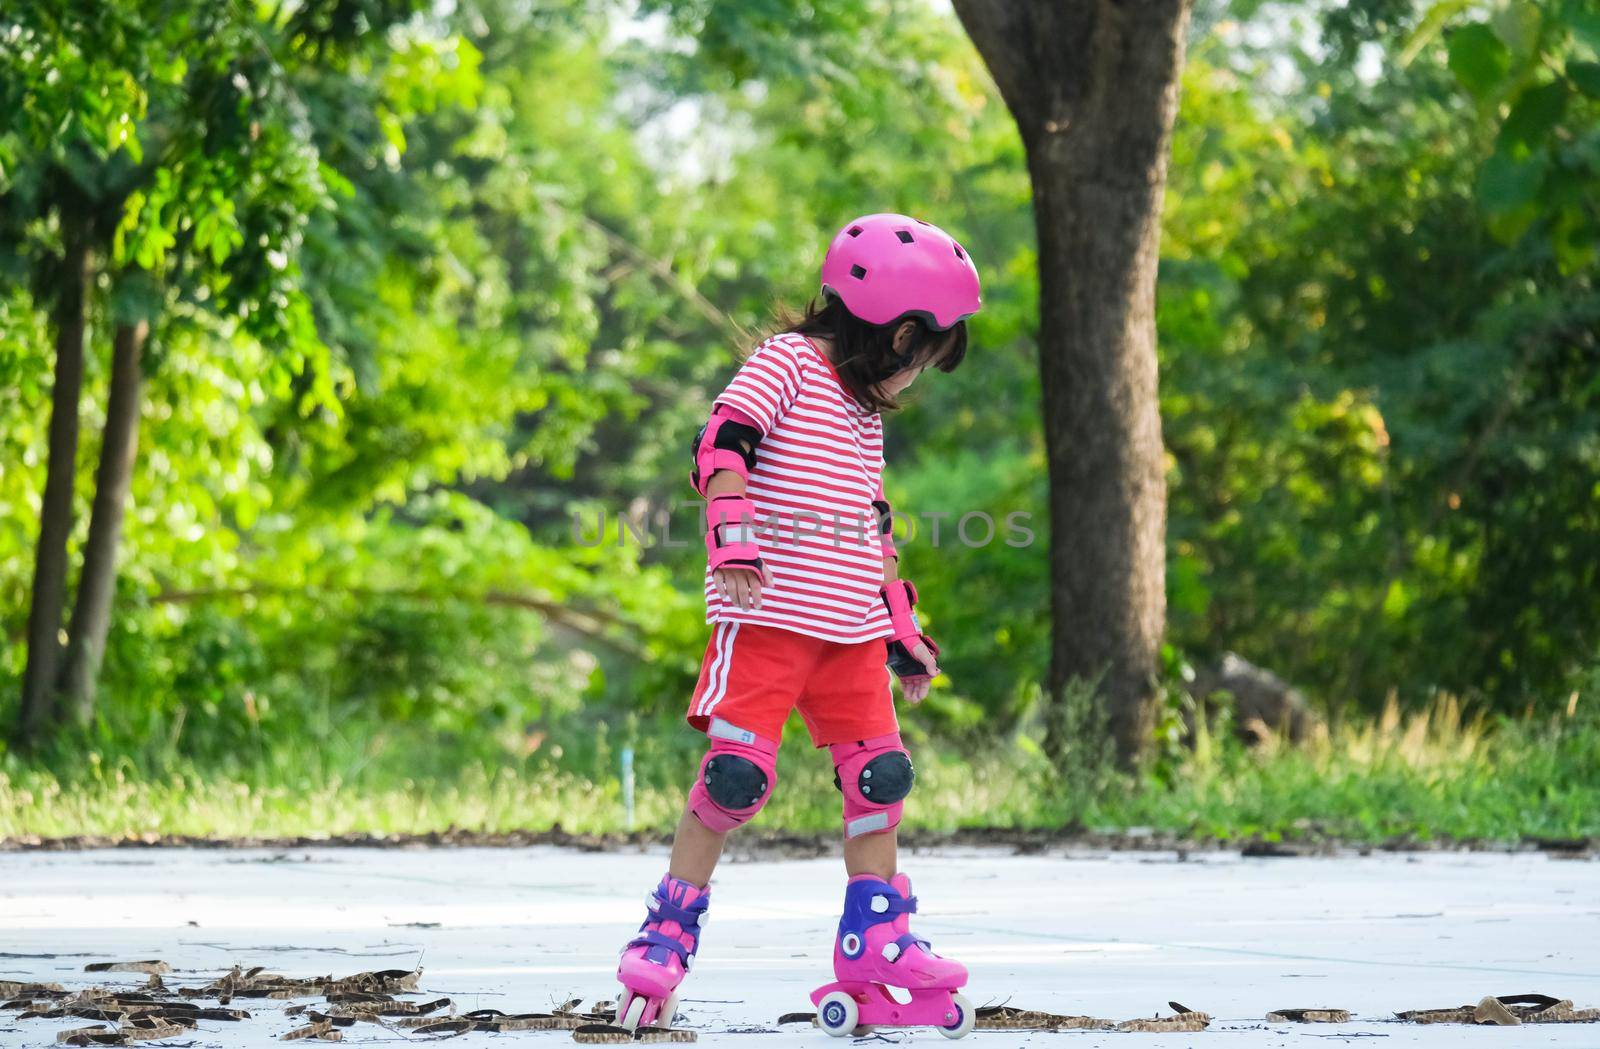 Cute Asian little girl in protective pads and safety helmet practicing roller skating in the park. Exciting outdoor activities for kids. by TEERASAK